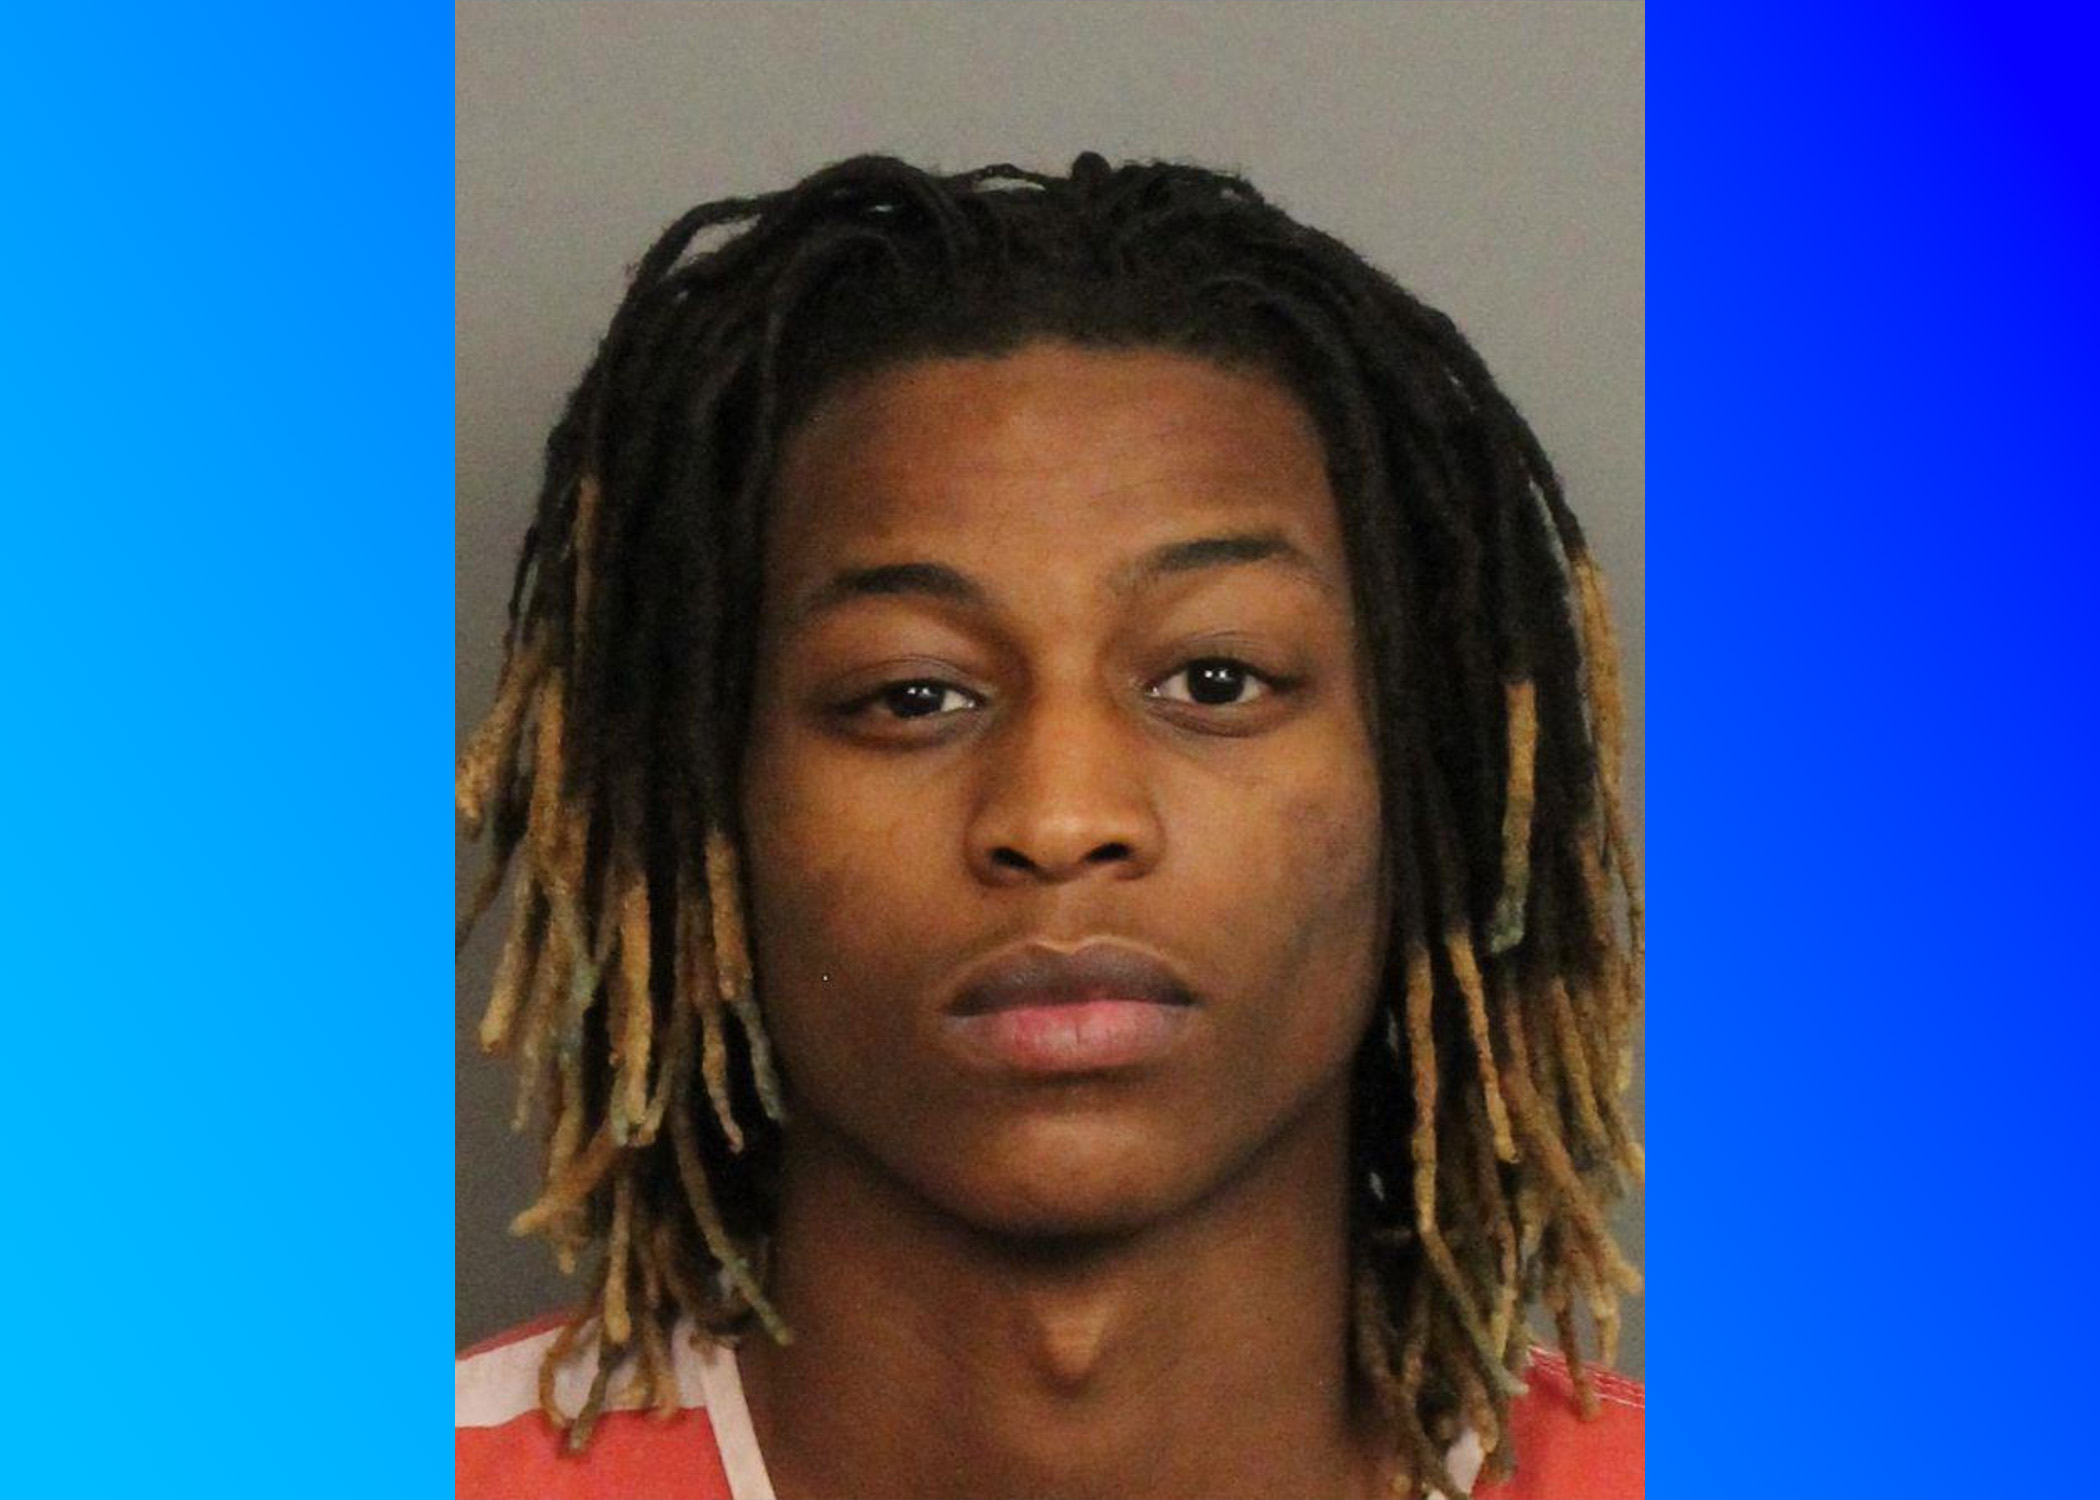 UPDATE: 19-year-old arrested in connection to homicide of Irondale teen